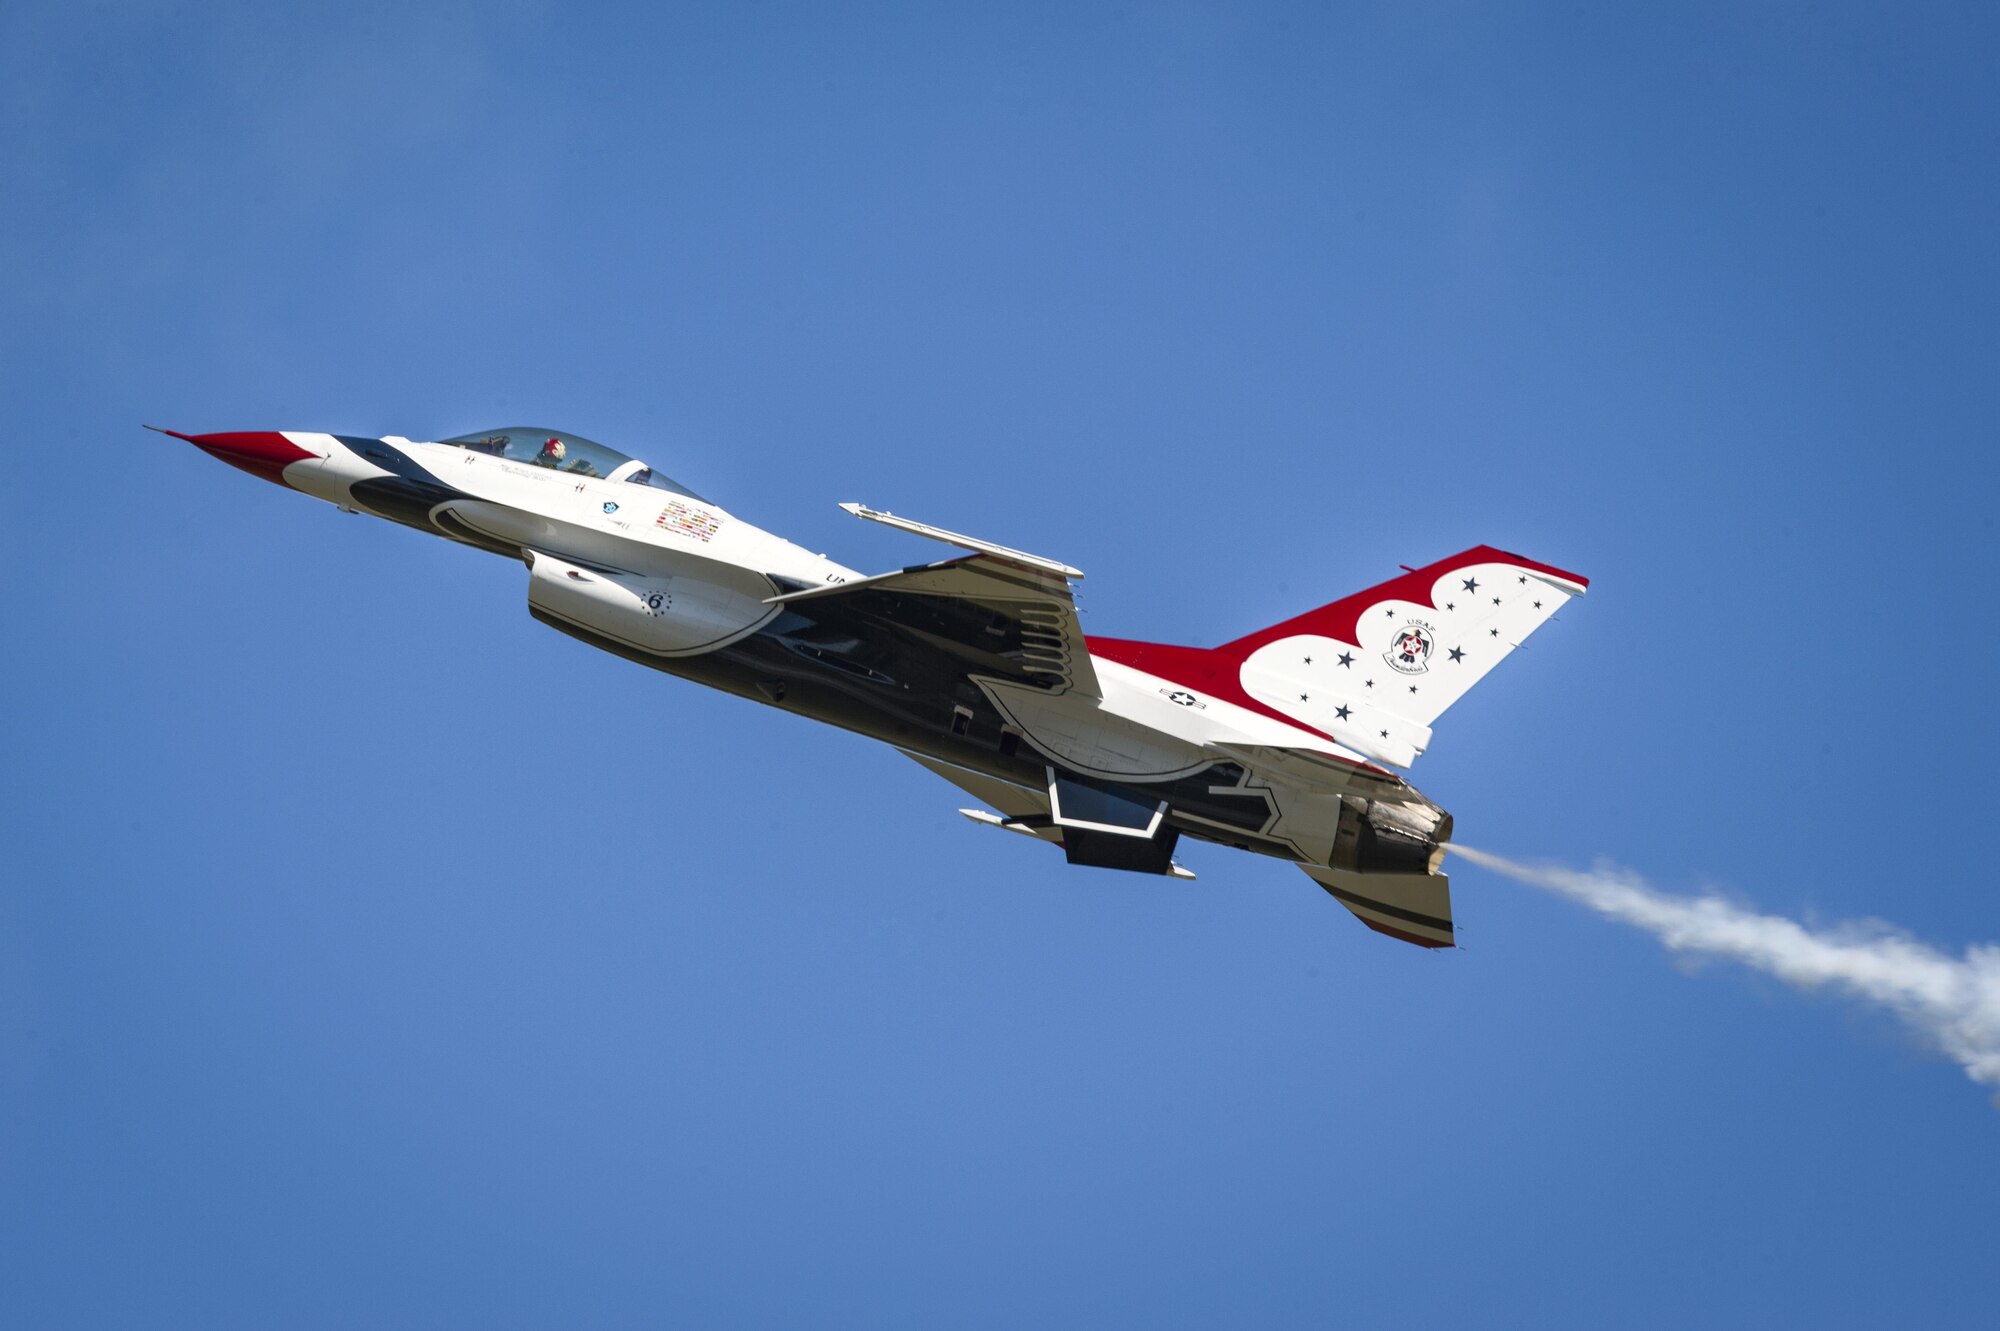 A member of the U.S. Air Force Thunderbirds Flight Demonstration Team soars above 11,000 spectators during the 2017 Thunder Over South Georgia Air Show, Oct. 29, 2017, at Moody Air Force Base, Ga. In addition to aerial performances by military and civilian pilots, attendees viewed aircraft through the ages perform such as the P-51 mustang, a World War II fighter, and Moody’s own A-10C Thunderbolt IIs, HH-60 G Pave Hawks and HC-130J Combat King IIs. (U.S. Air Force photo by Senior Airman Greg Nash)